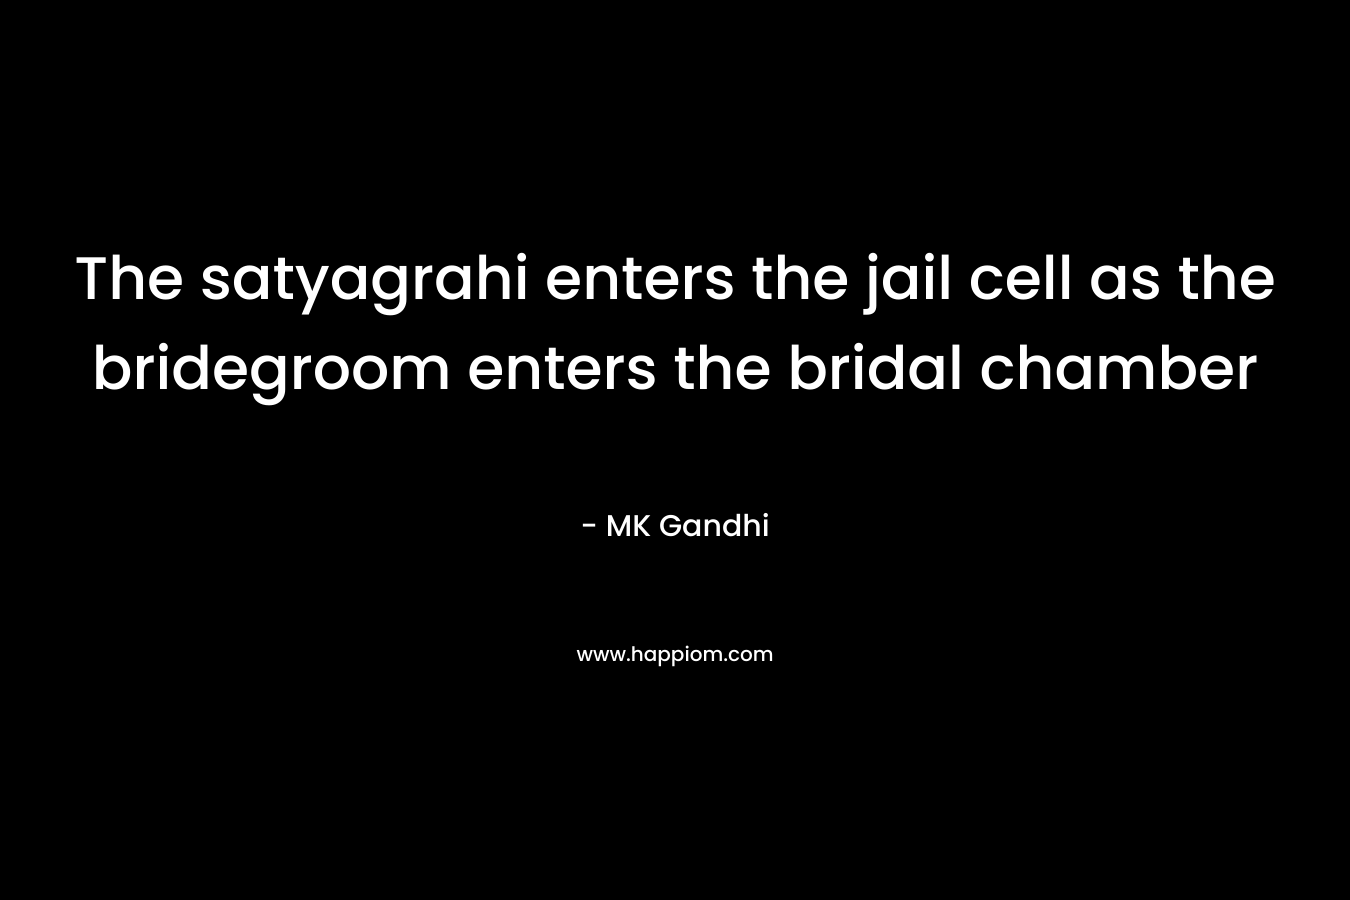 The satyagrahi enters the jail cell as the bridegroom enters the bridal chamber